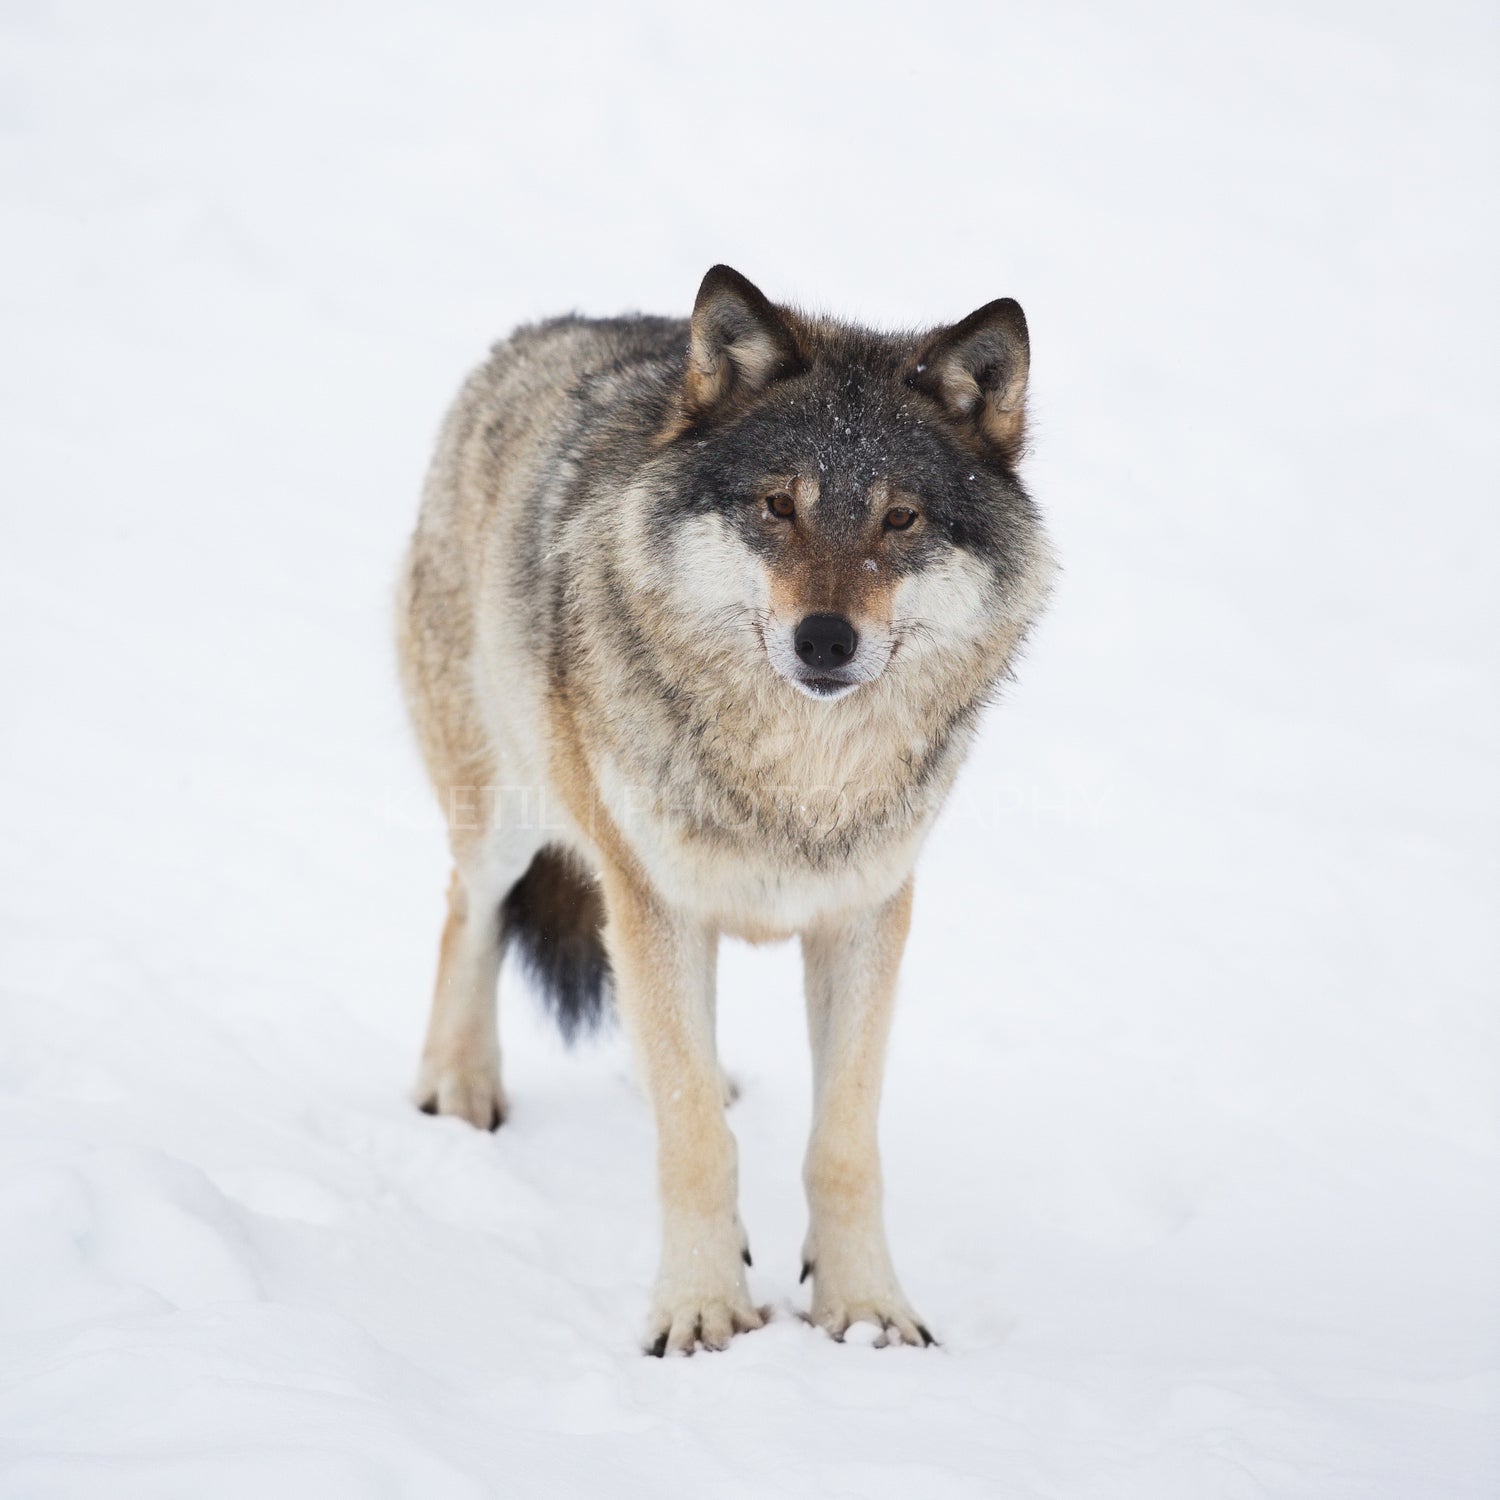 One Wolf Alone in the Snow